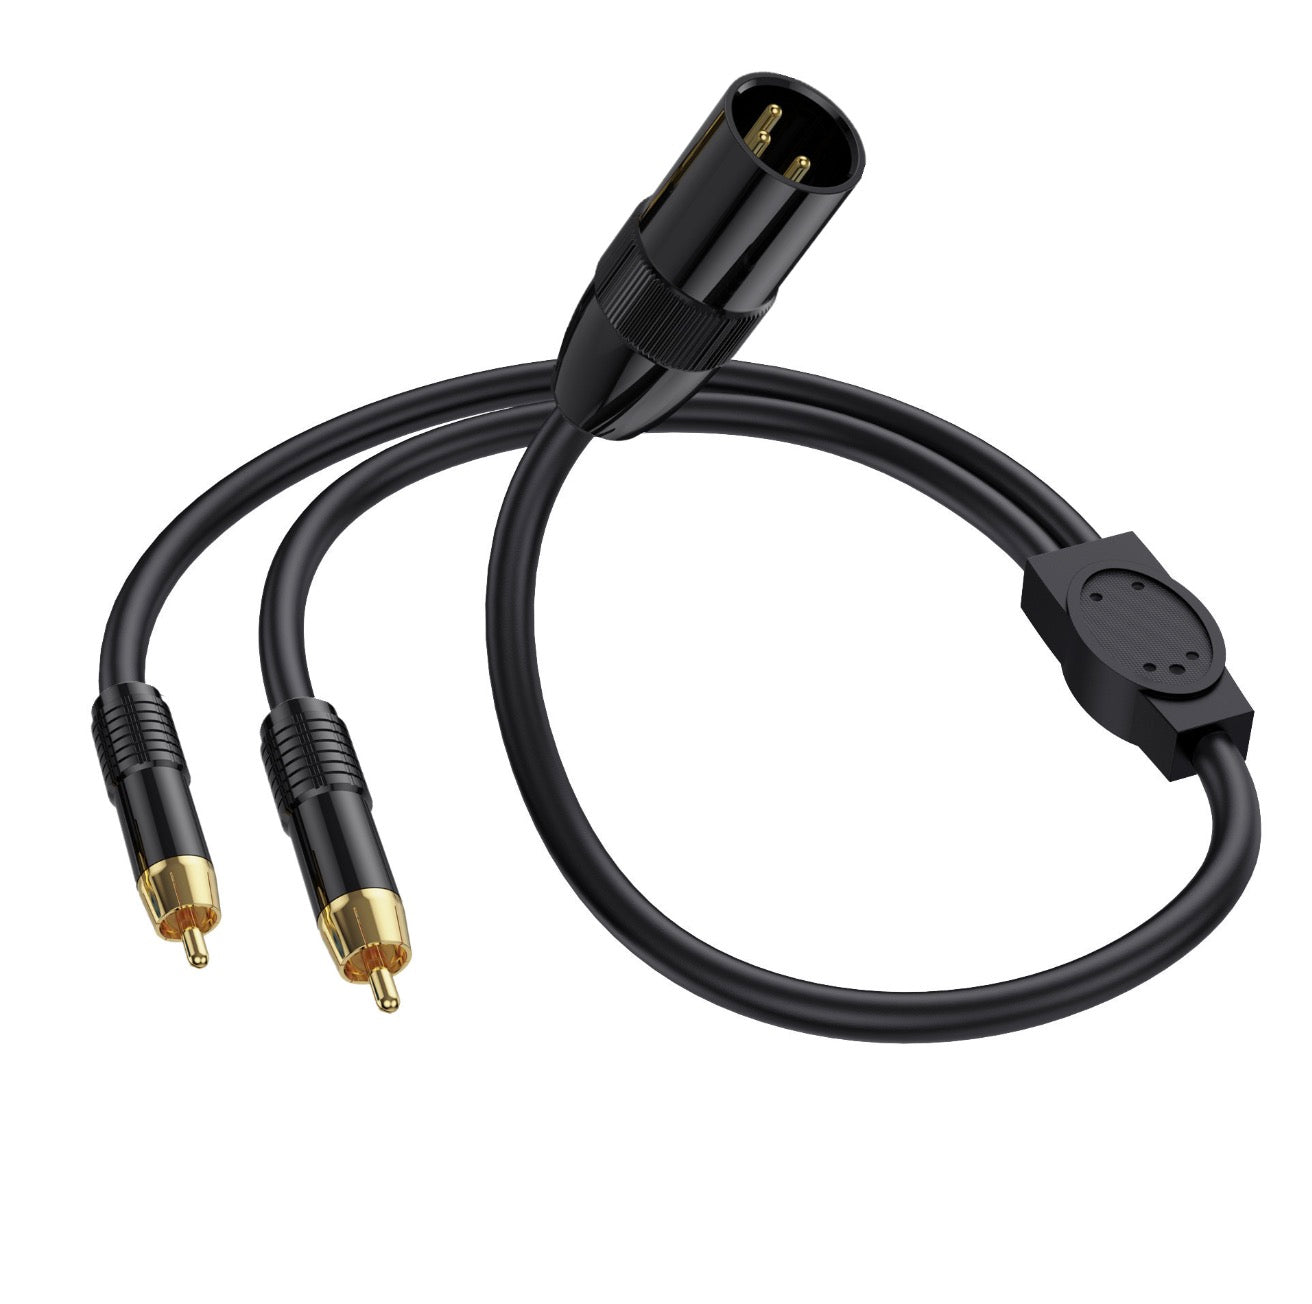 XLR Male to 2 x Phono RCA Y Splitter Patch Cable, 1 XLR Male 3Pin to Dual RCA Male Plug Stereo Audio Cable